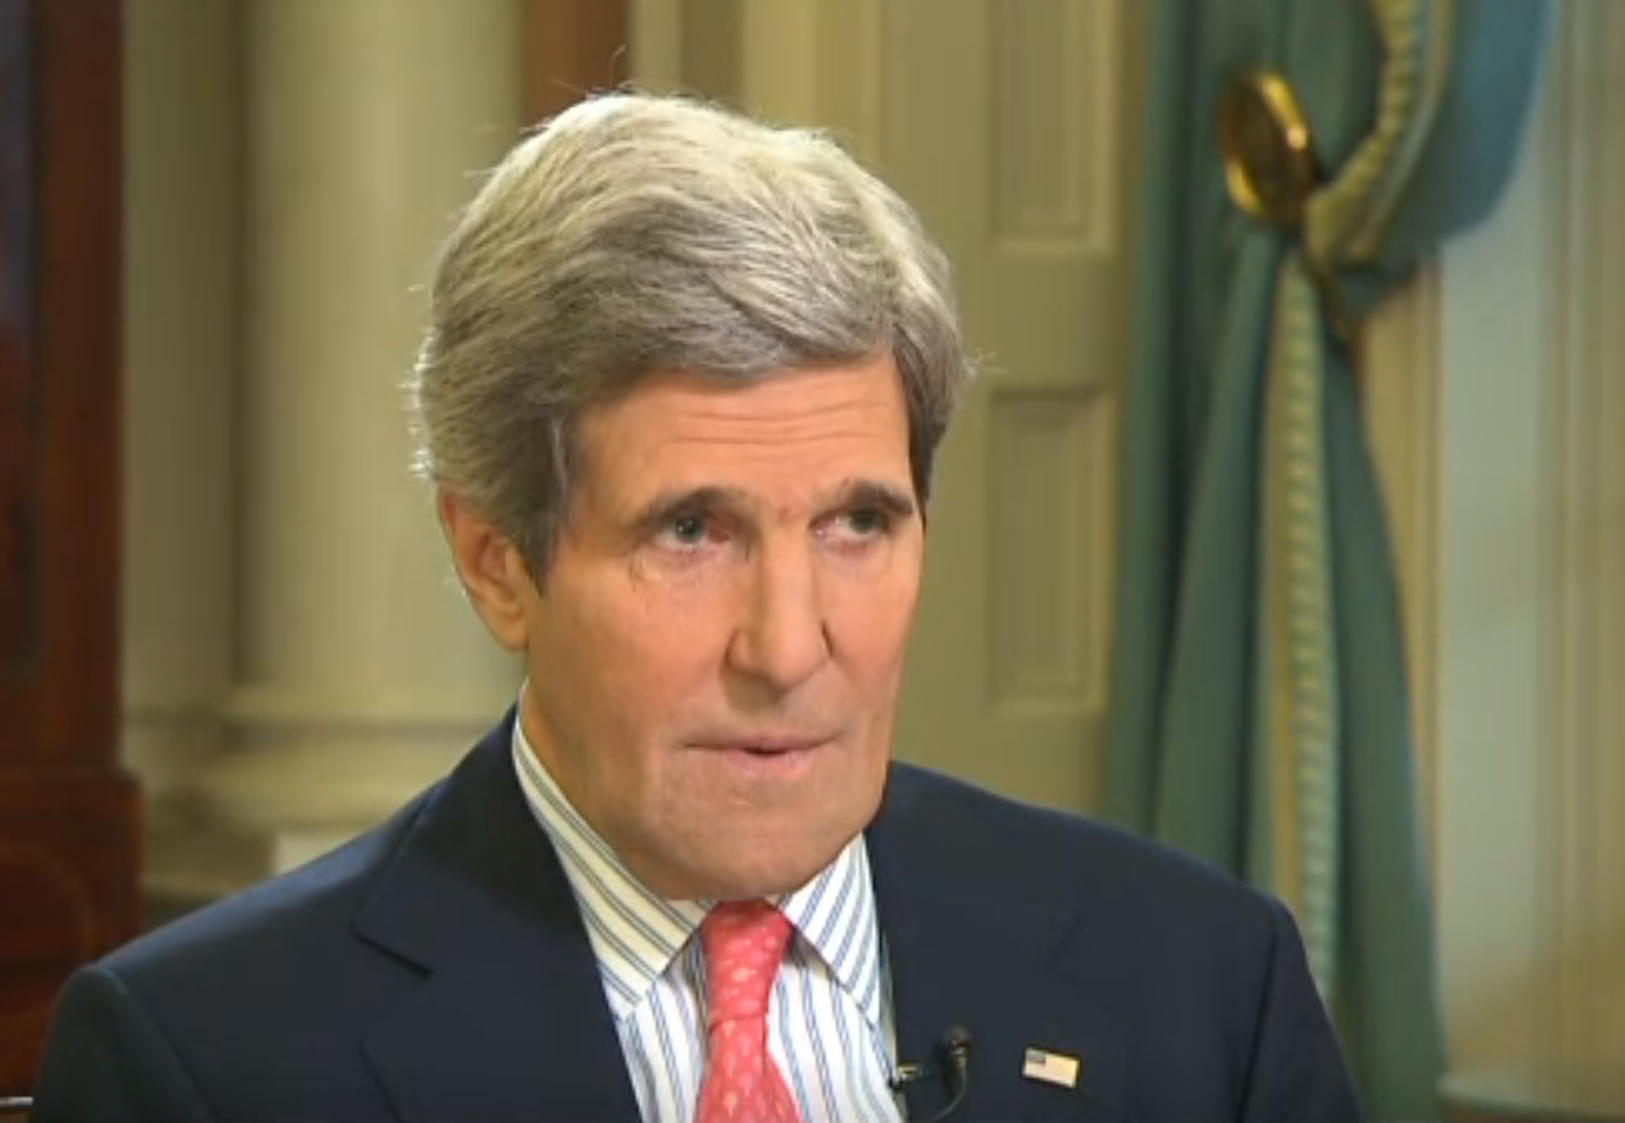 Kerry Lands in Turkey Seeking Support for Anti-ISIS Coalition